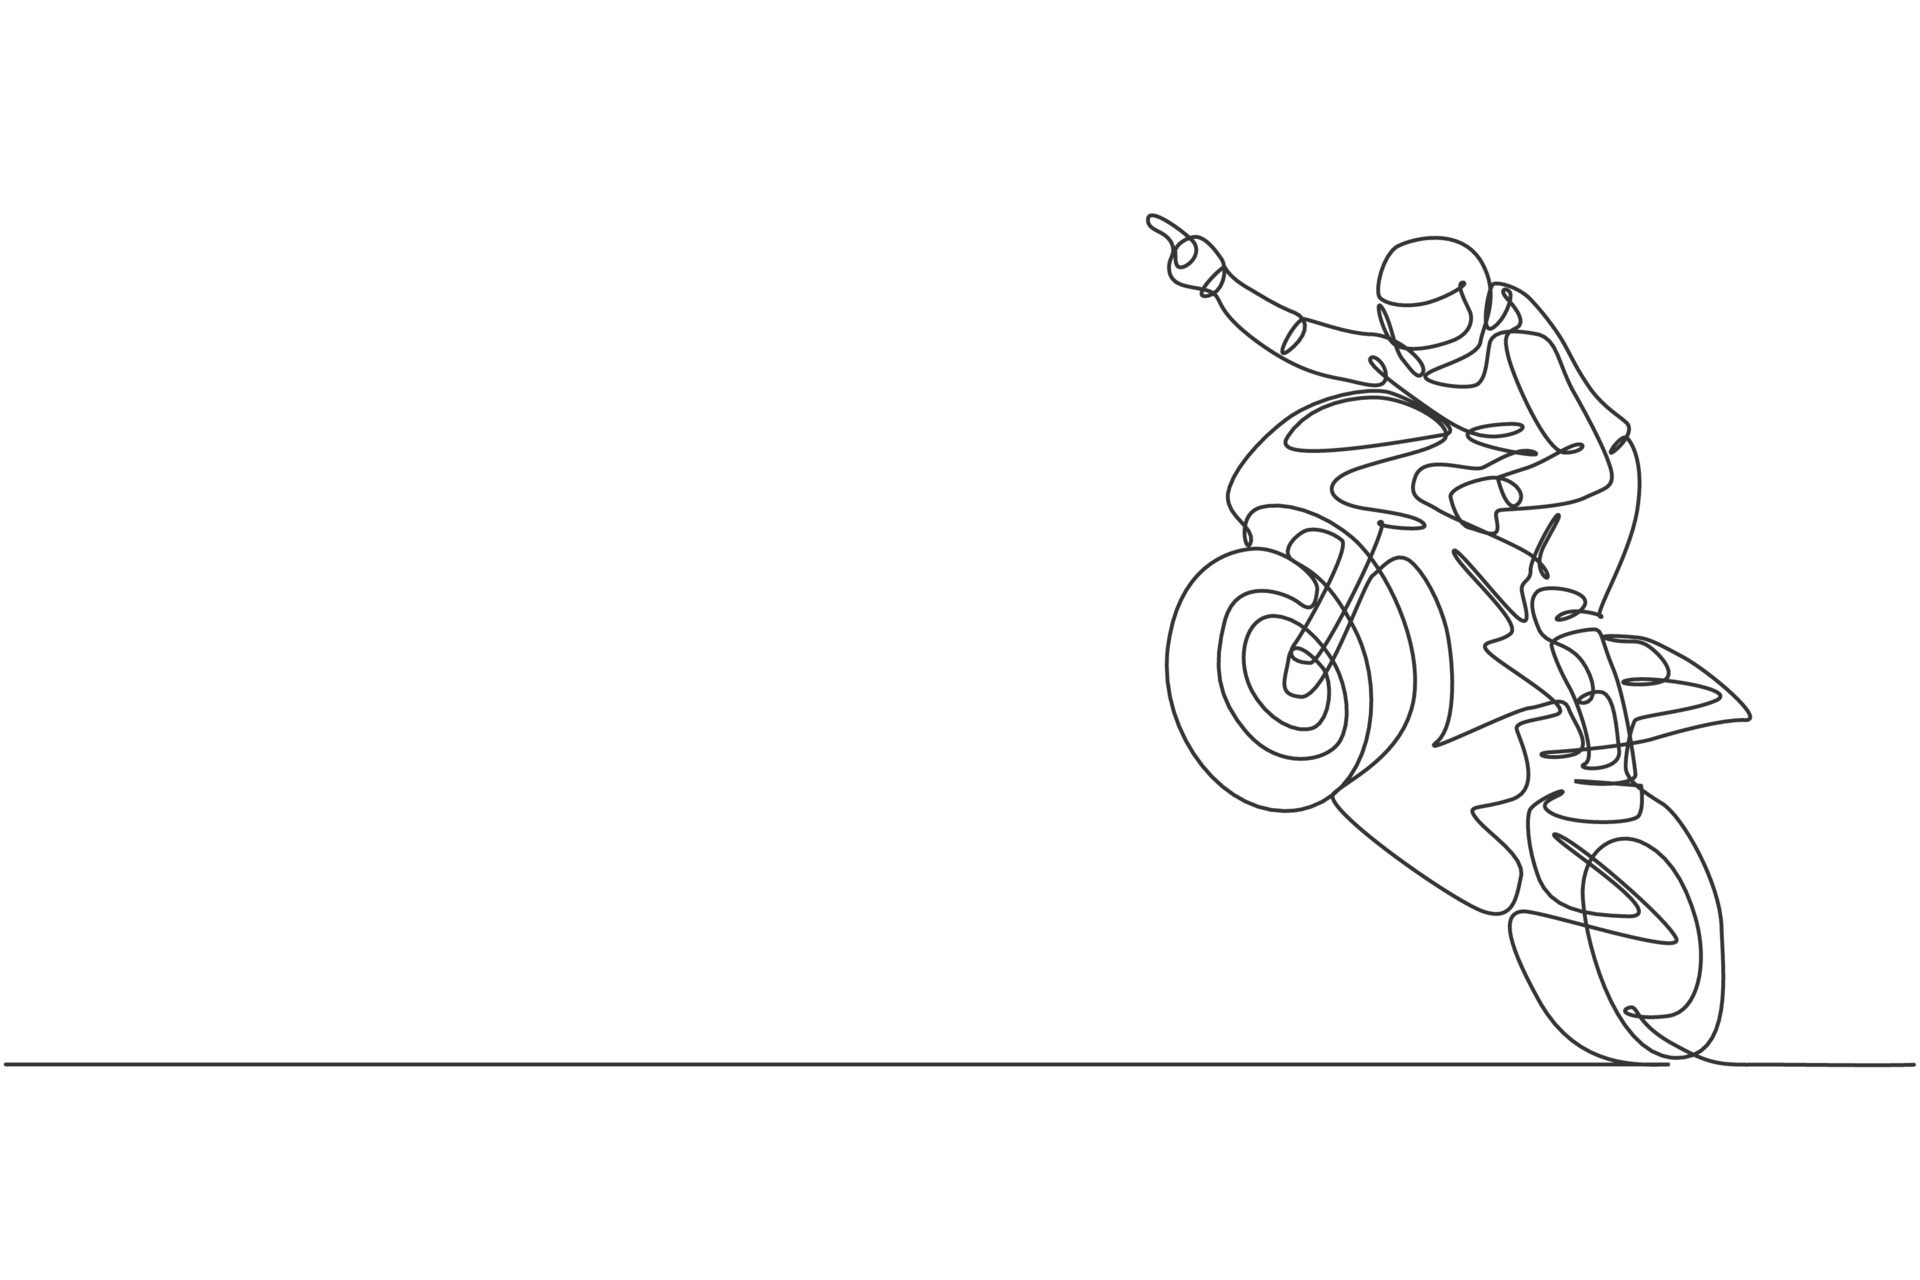 how to draw ktm bike step by step for beginners - YouTube